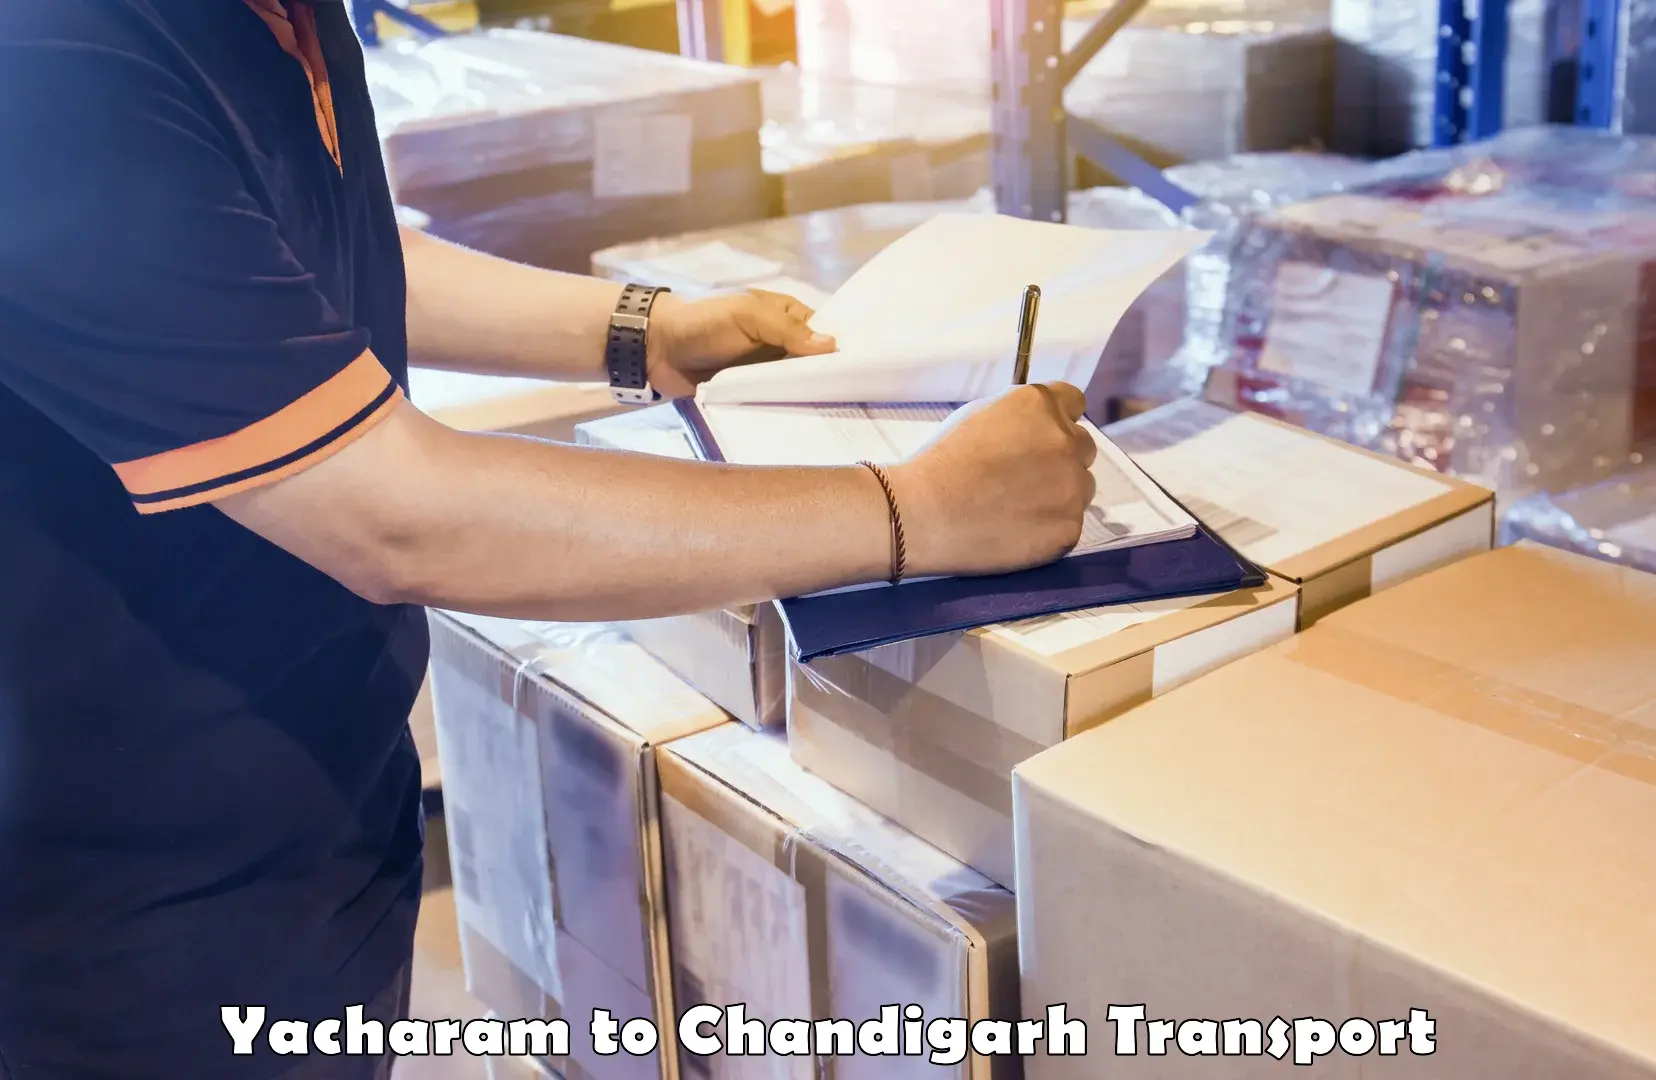 Daily parcel service transport Yacharam to Chandigarh